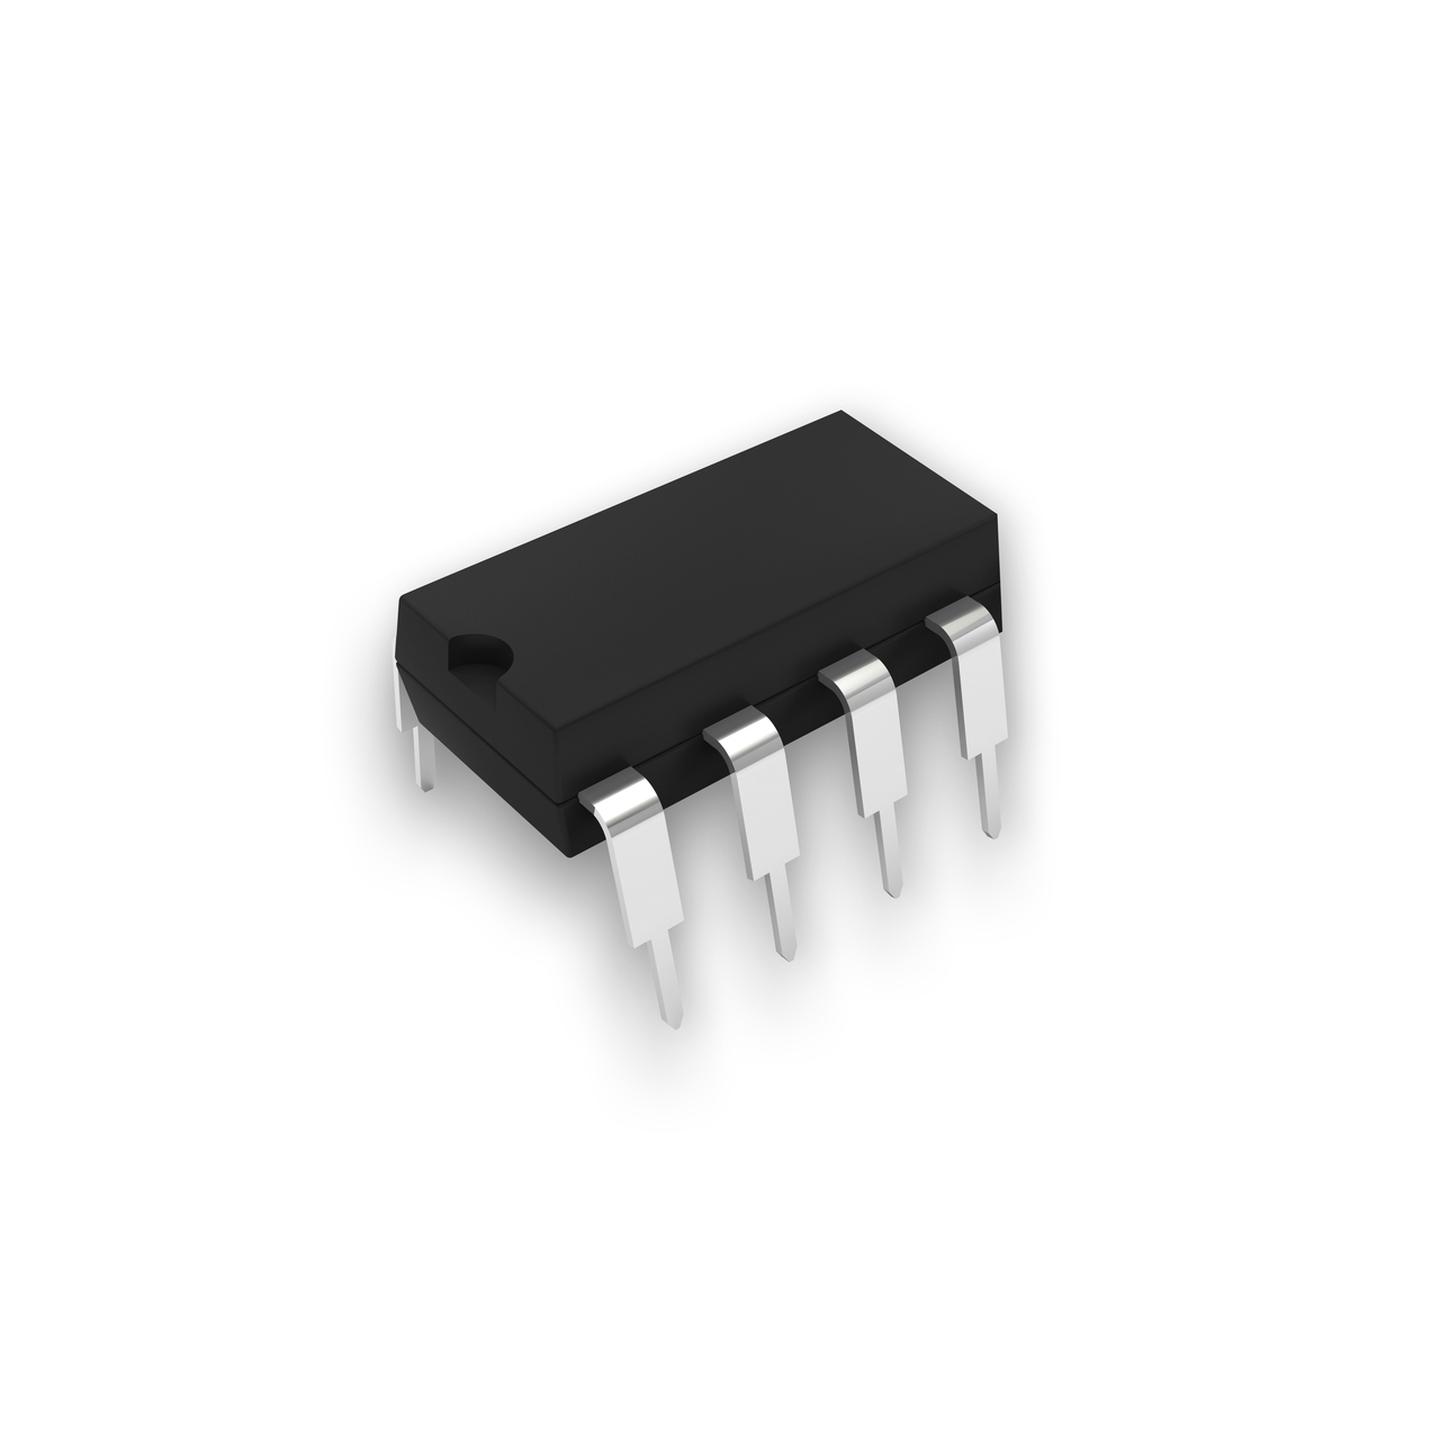 LM308 Precision Op-amp Linear IC